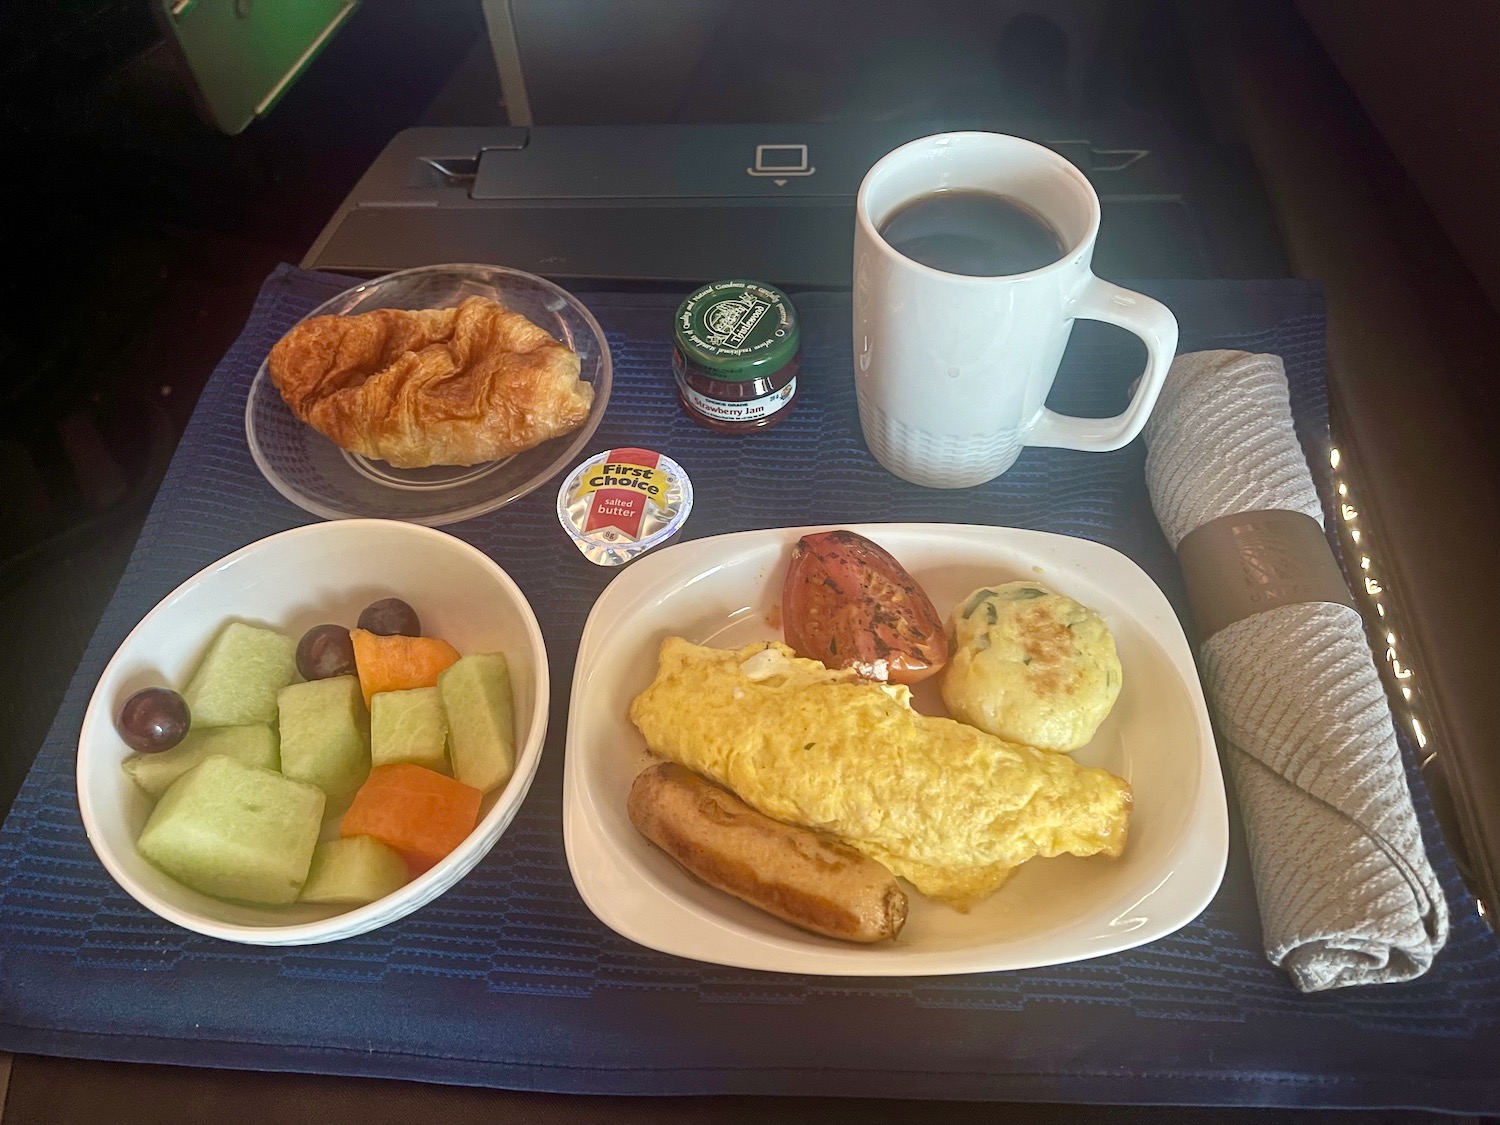 a plate of food and a cup of coffee on a tray